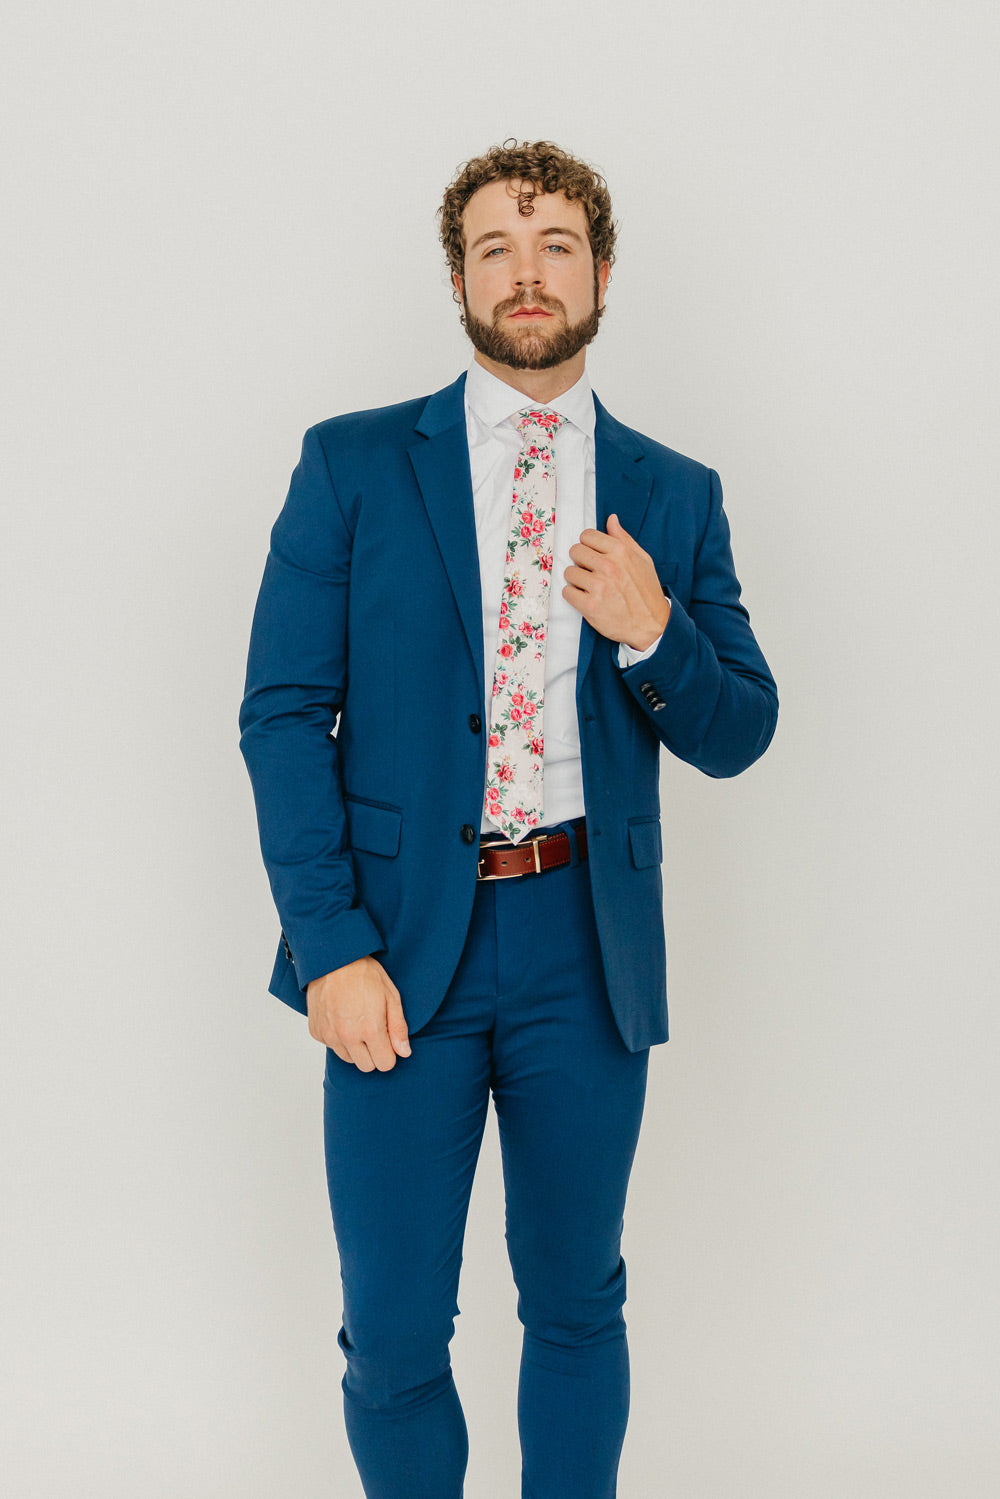 Rose Garden 2.5" Wide Skinny Tie worn with a white shirt, brown belt and royal blue suit.